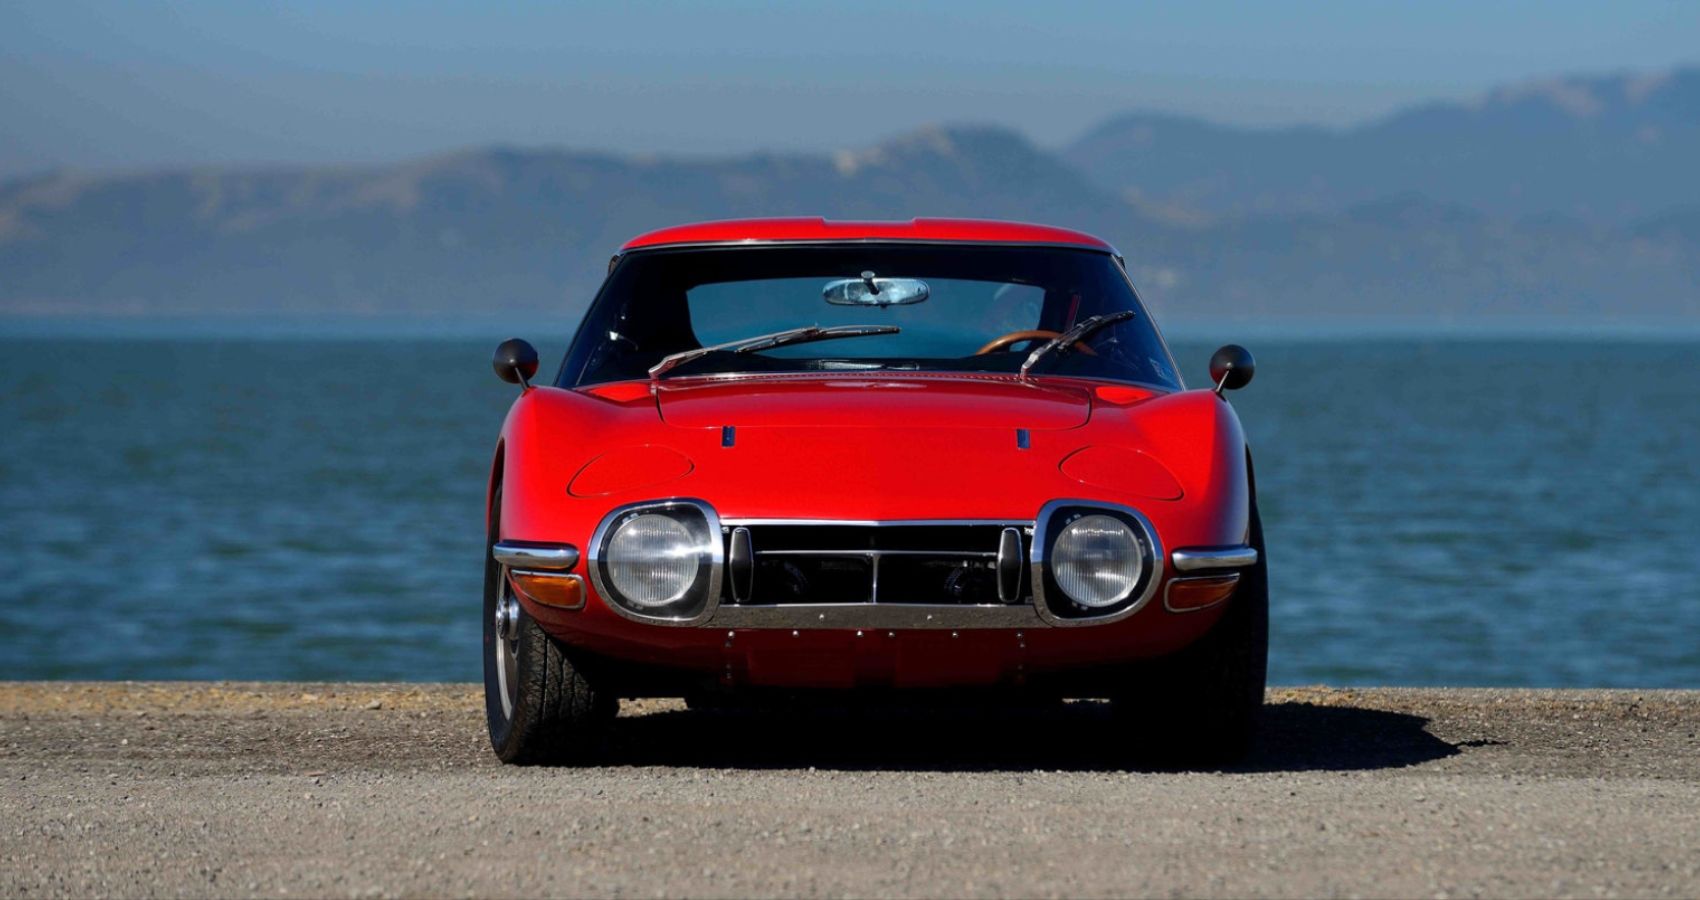 Why The Toyota 2000GT Is The Best Classic Car For Gearheads